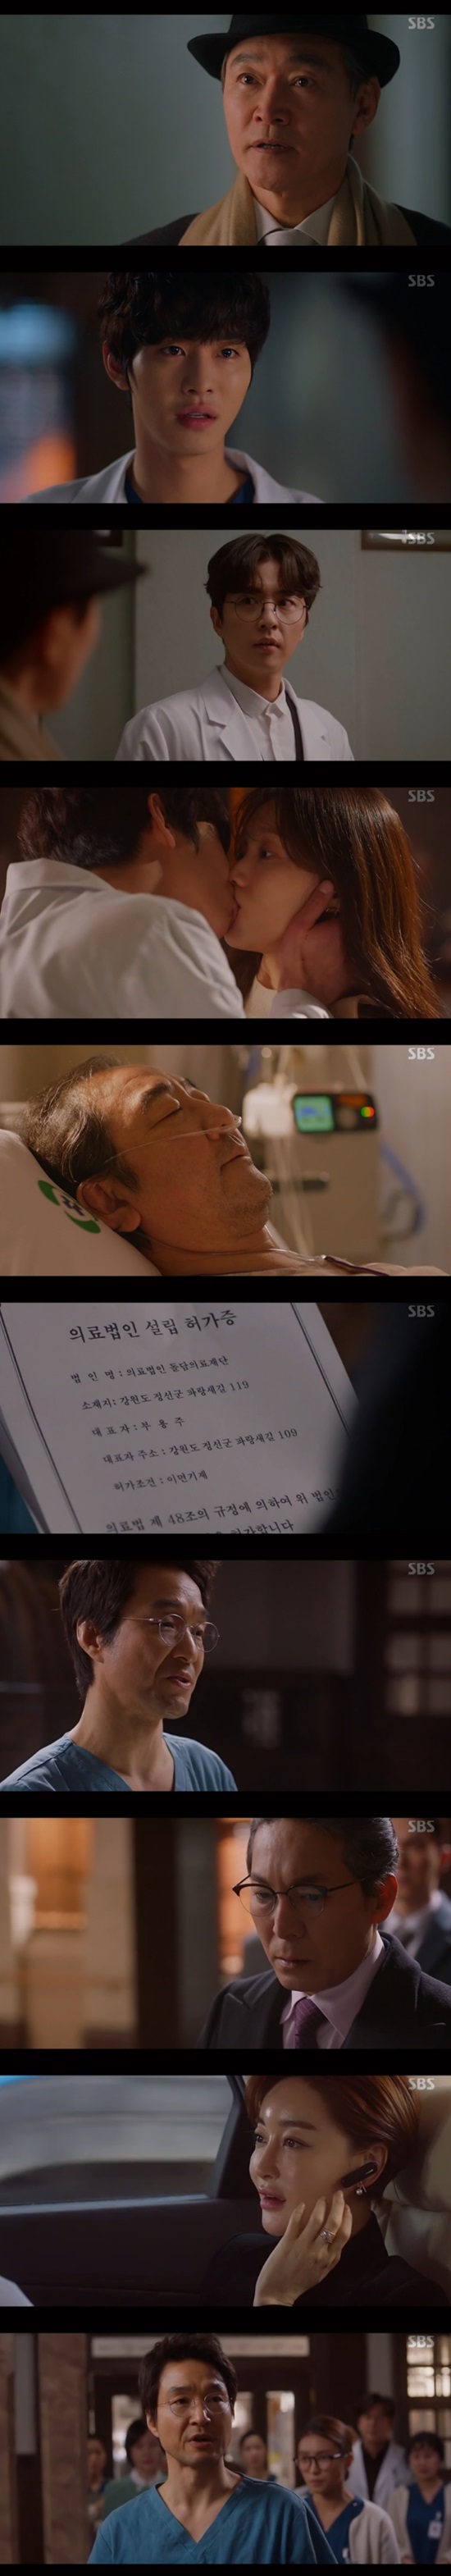 Han Suk-kyu guarded Doldam Hospital, and Ahn Hyo-seop Lee Sung-kyung became a lover.In the 16th episode of SBSs Romantic Doctor Kim Sabu 2 broadcast on February 25 (the last episode/playplayplay Kang Eun-kyung/director Yoo In-sik Lee Gil-bok), Han Suk-kyu kept Doldam Hospital.Yoon A-reum (Soo Ju-yeon) spoke by phone with Do In-beom (Yang Se-jong) and when Park Eun-tak (Kim Min-jae) was caught, he confessed, Do In-beom is my kind, my aunts son, and Park Eun-tak sighed.In front of Park Eun-tak, Yeo Un-yeong (Kim Hong-pa) found the ceremony. Kim Sa-bu apologized, Im sorry, I didnt keep my promise with the director. Yeo Un-yeong surprised everyone by wanting dignity.The man who came to Bae Moon-jung (Shin Dong-wook) was his father, and he told Seo Woo Jin (Ahn Hyo-seop) I am young and should not live like my father.You should be a big friend to our son in the future.Bae Mun-jung was angry at his father, and he was shocked by the fact that the owner of the loan shark who borrowed money from his father Seo Woo Jin was his father.Park Min-guk (Kim Joo-heon) did not leave his resignation letter on his desk and Yang Ho-joon (Ko Sang-ho) tore the resignation letter and told Do Yun-wan (Choi Jin-ho), who came to Doldam Hospital, Give Professor Park another chance.I can do anything. Yang looked behind him, believing that finding out Kims name would be his chance.Cha Eun-jae (Lee Sung-kyung) was in conflict after receiving a call from Professor Oh to return to the main office, and Kim Sa-bu hoped to catch it, but Kim Sa-bu said he would support Cha Eun-jaes choice.Seo Woo Jin did not catch Cha Eun-jae, and Cha Eun-jae asked why he did not hold.When Seo Woo Jin asked, What if you regret later? Cha Eun-jae kissed Seo Woo Jin, saying, Well, Ill do that you told me.Kim said, I will not treat my life anymore according to the will of the director today, Kim said to the medical staff.Lets go and say hello to the people who will say hello.Its sad to break up, but its probably not that sad to die, Yeo Un-yeong said, and died after removing the life support device.Seo Woo Jin solved Kim Sabus homework with the help of Bae Moon-jung, Jung In-soo (Yoon Na-moo), Park Eun-tak.Kim decided to undergo wrist surgery as promised, and asked Park Min-guk to take the surgery for three weeks.Cha Eun-jae helped Professor Oh in his urgent surgery and decided to return in two days, but he did not return for ten days, and Seo Woo Jin was worried.Yoo Gyeong-sang